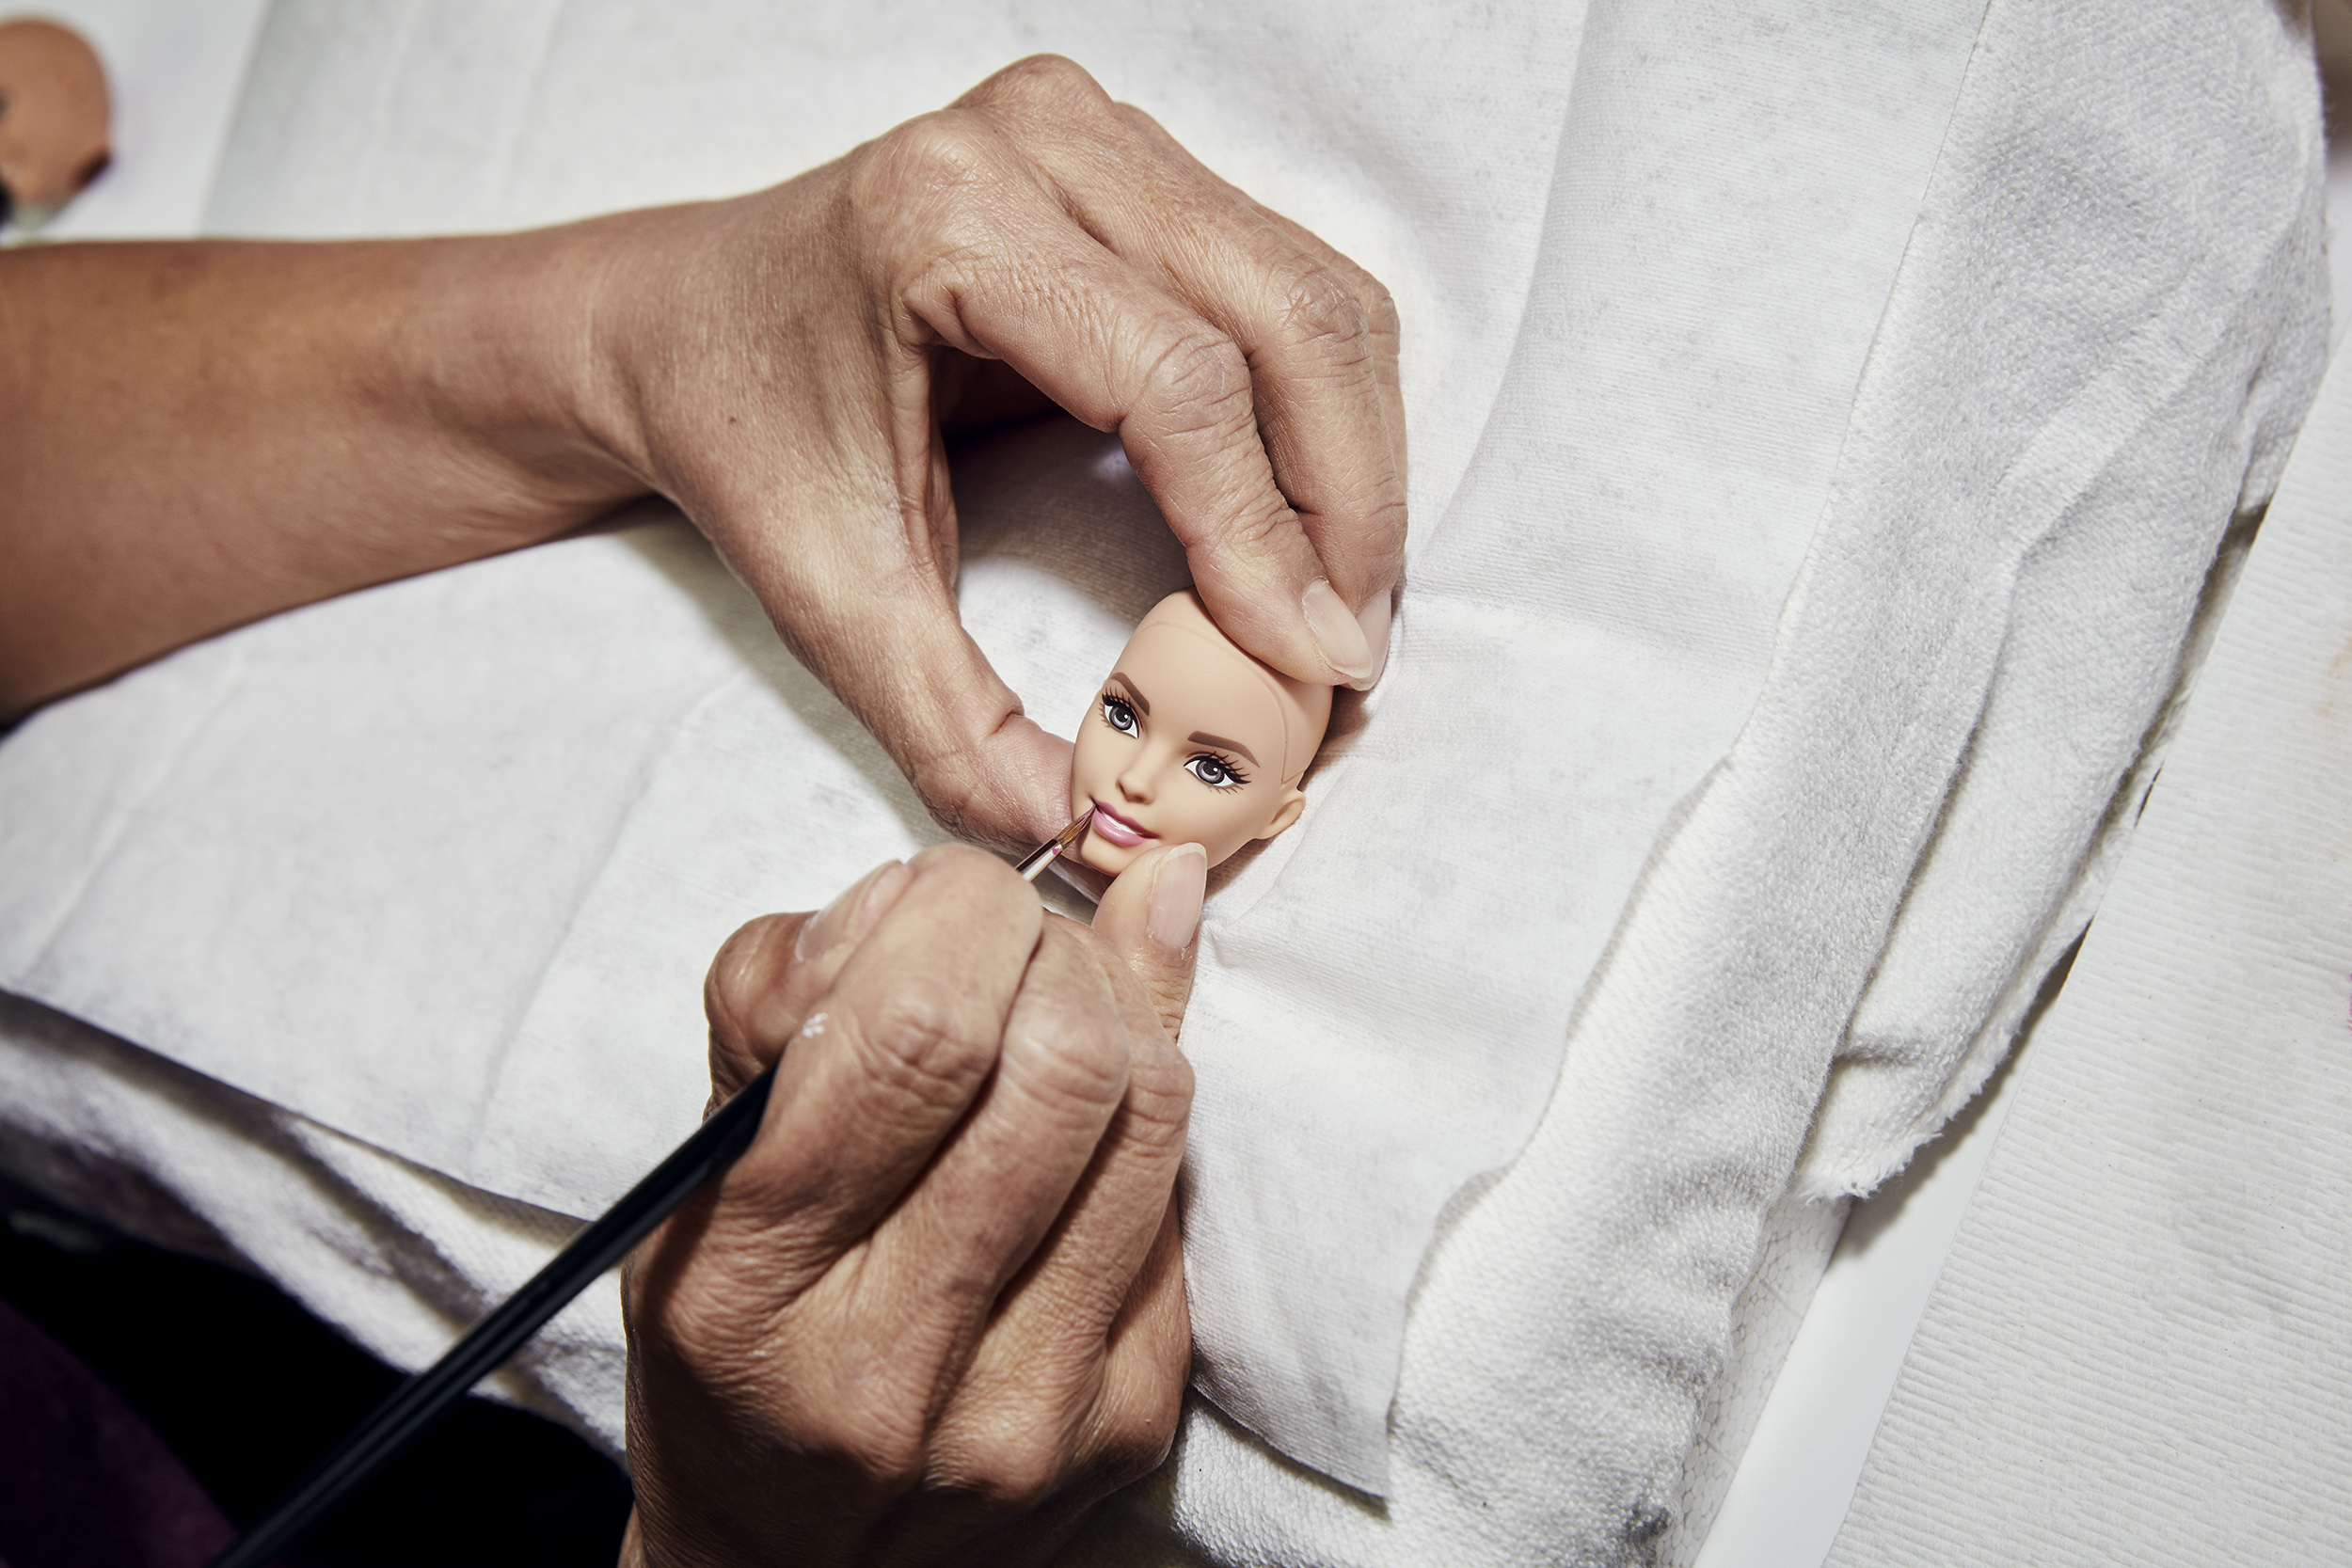 A designer hand paints the lips of a prototype Barbie doll.